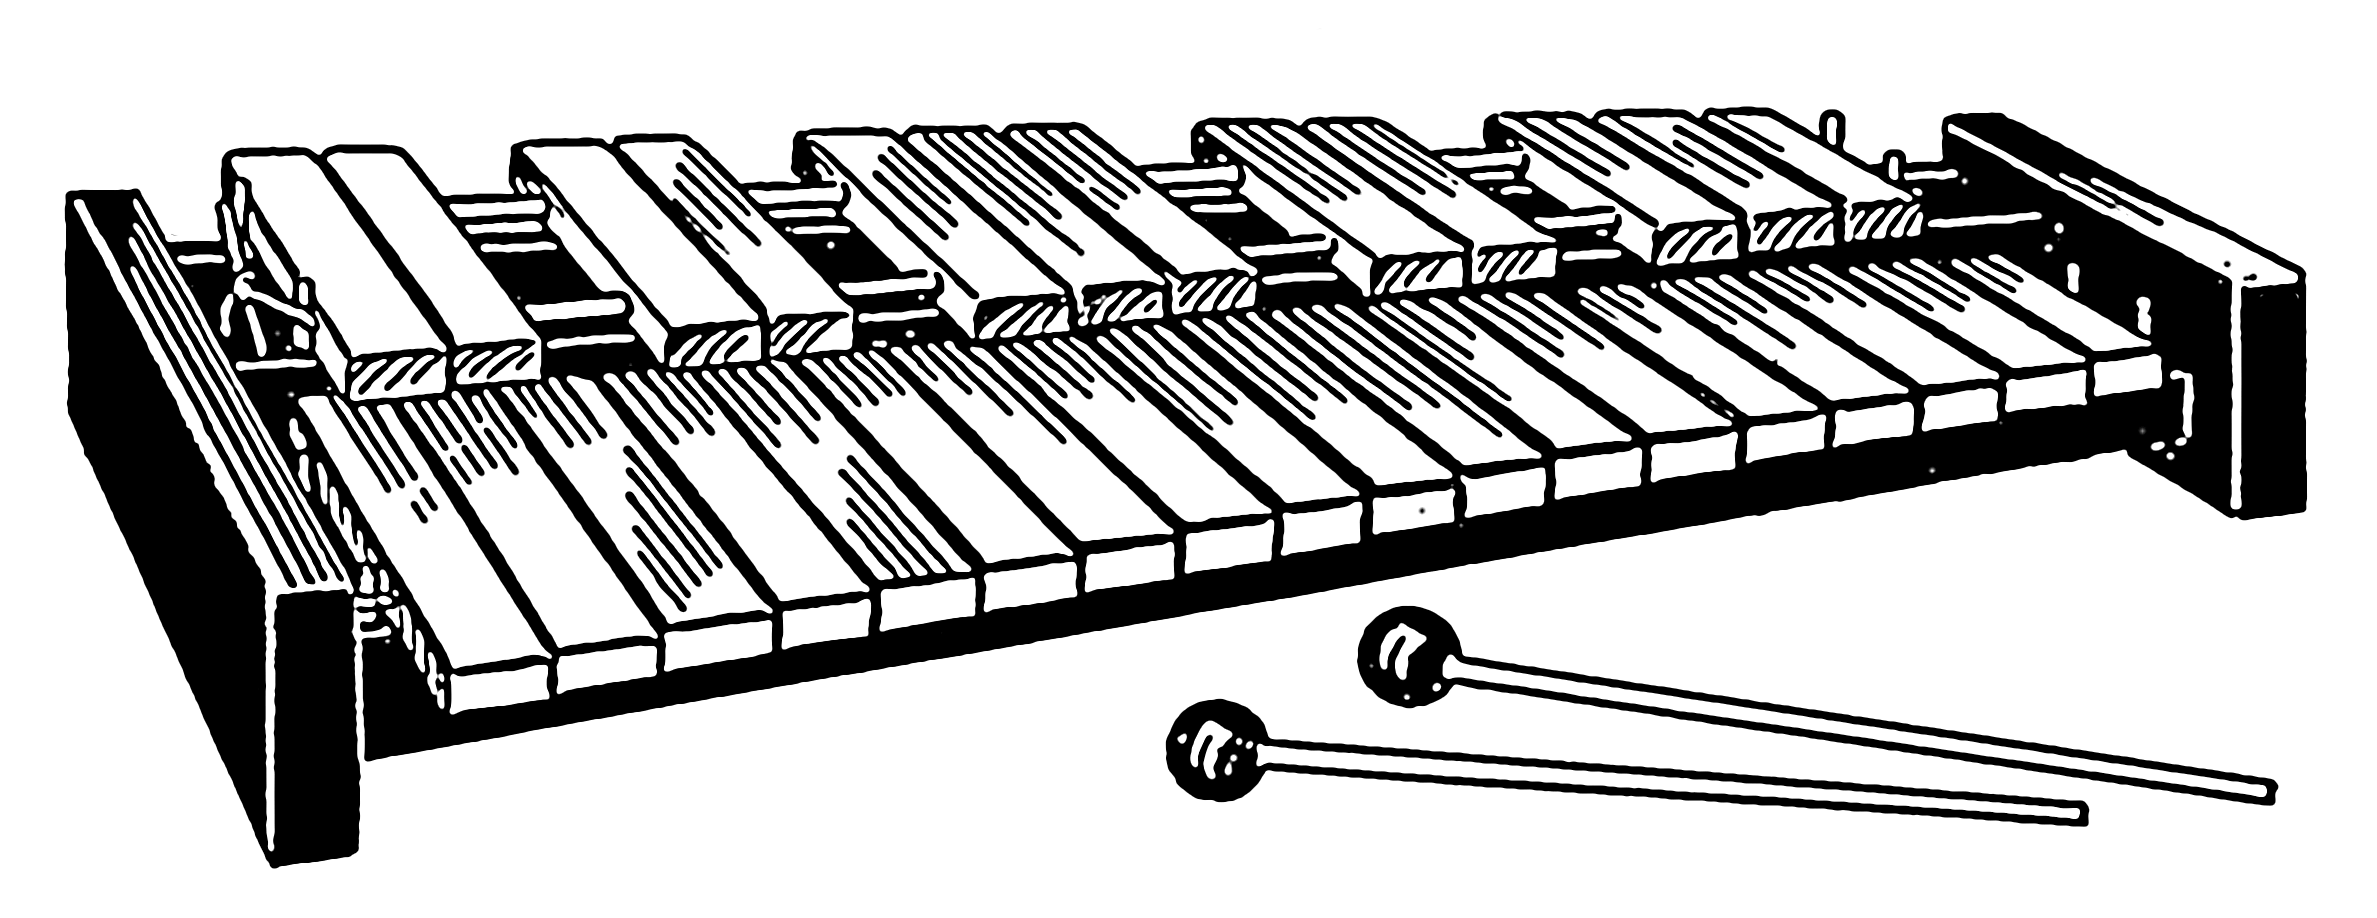 Xylophone Free Png Image PNG 